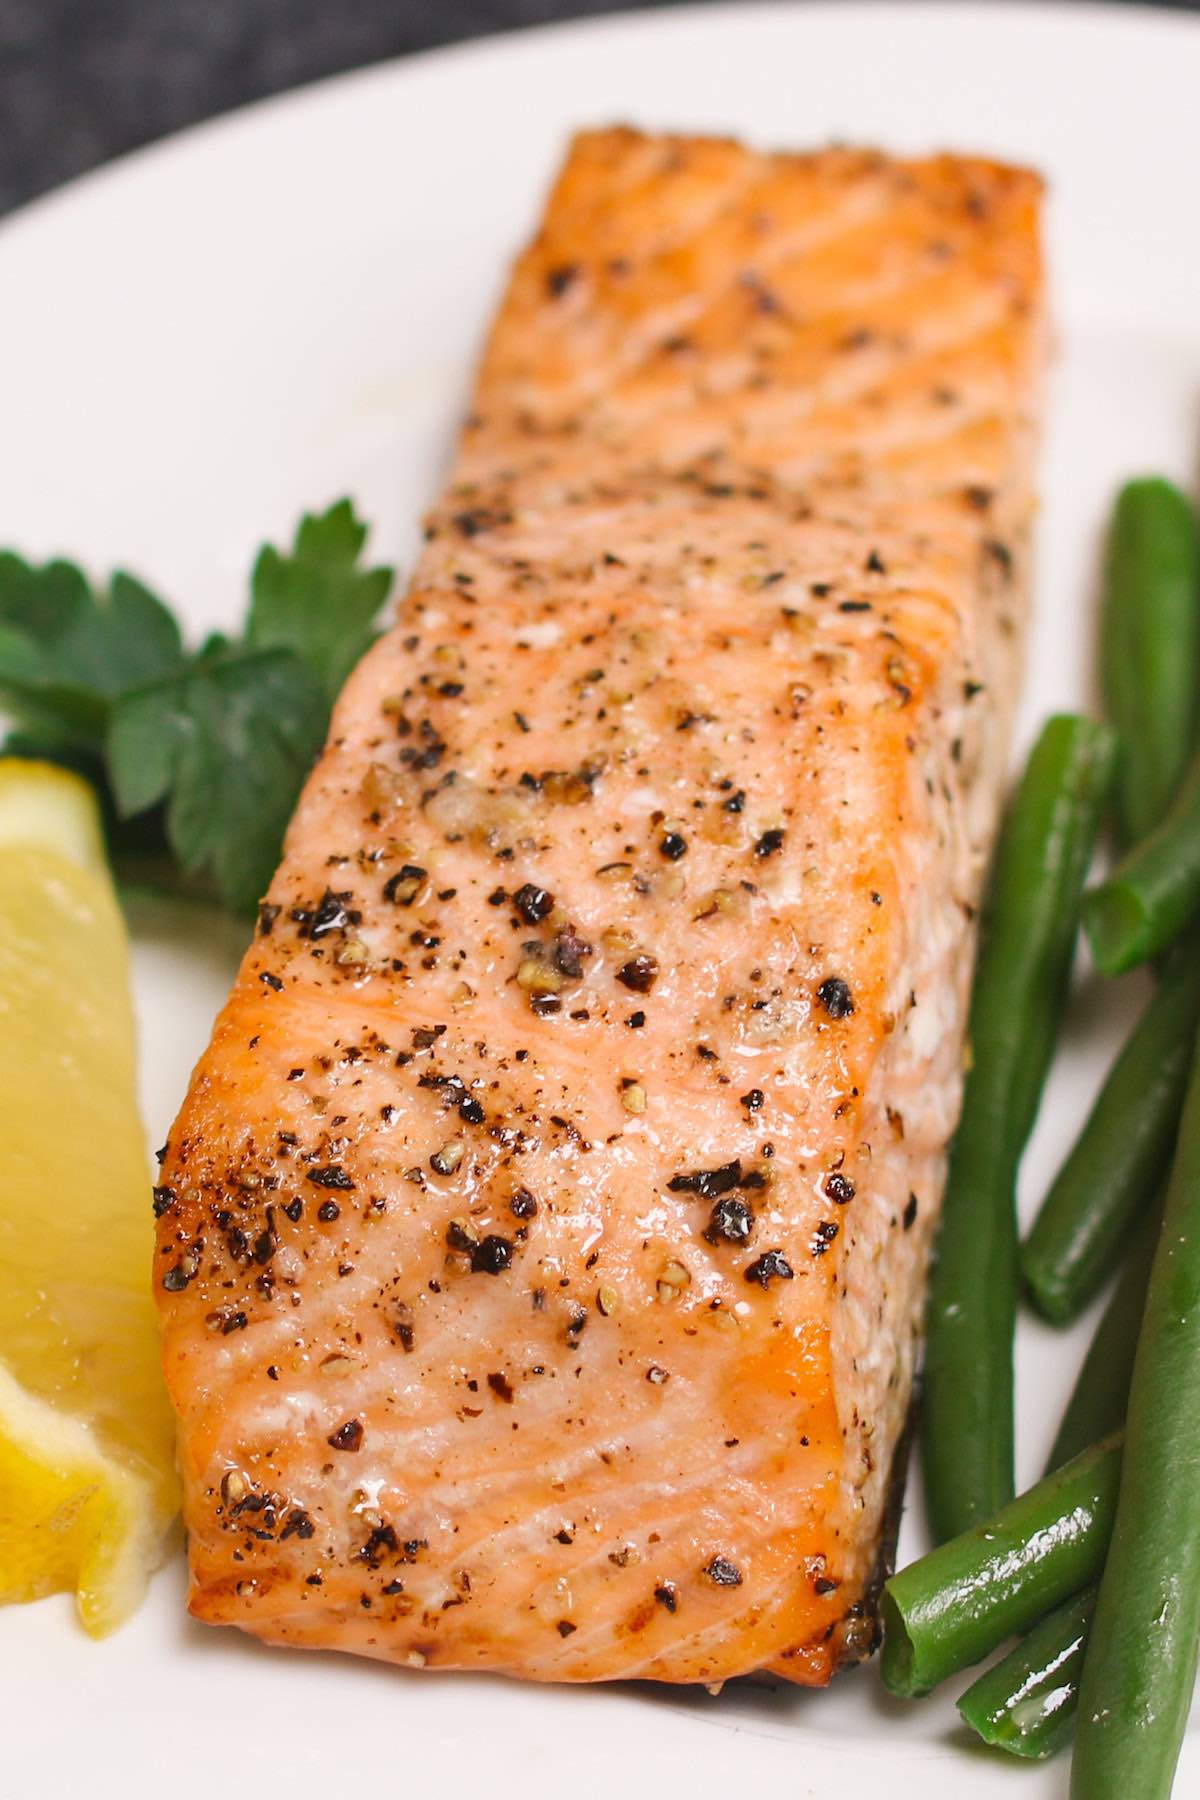 Center cut salmon fillet that's been baked to perfection featuring a golden exterior and served with green beans